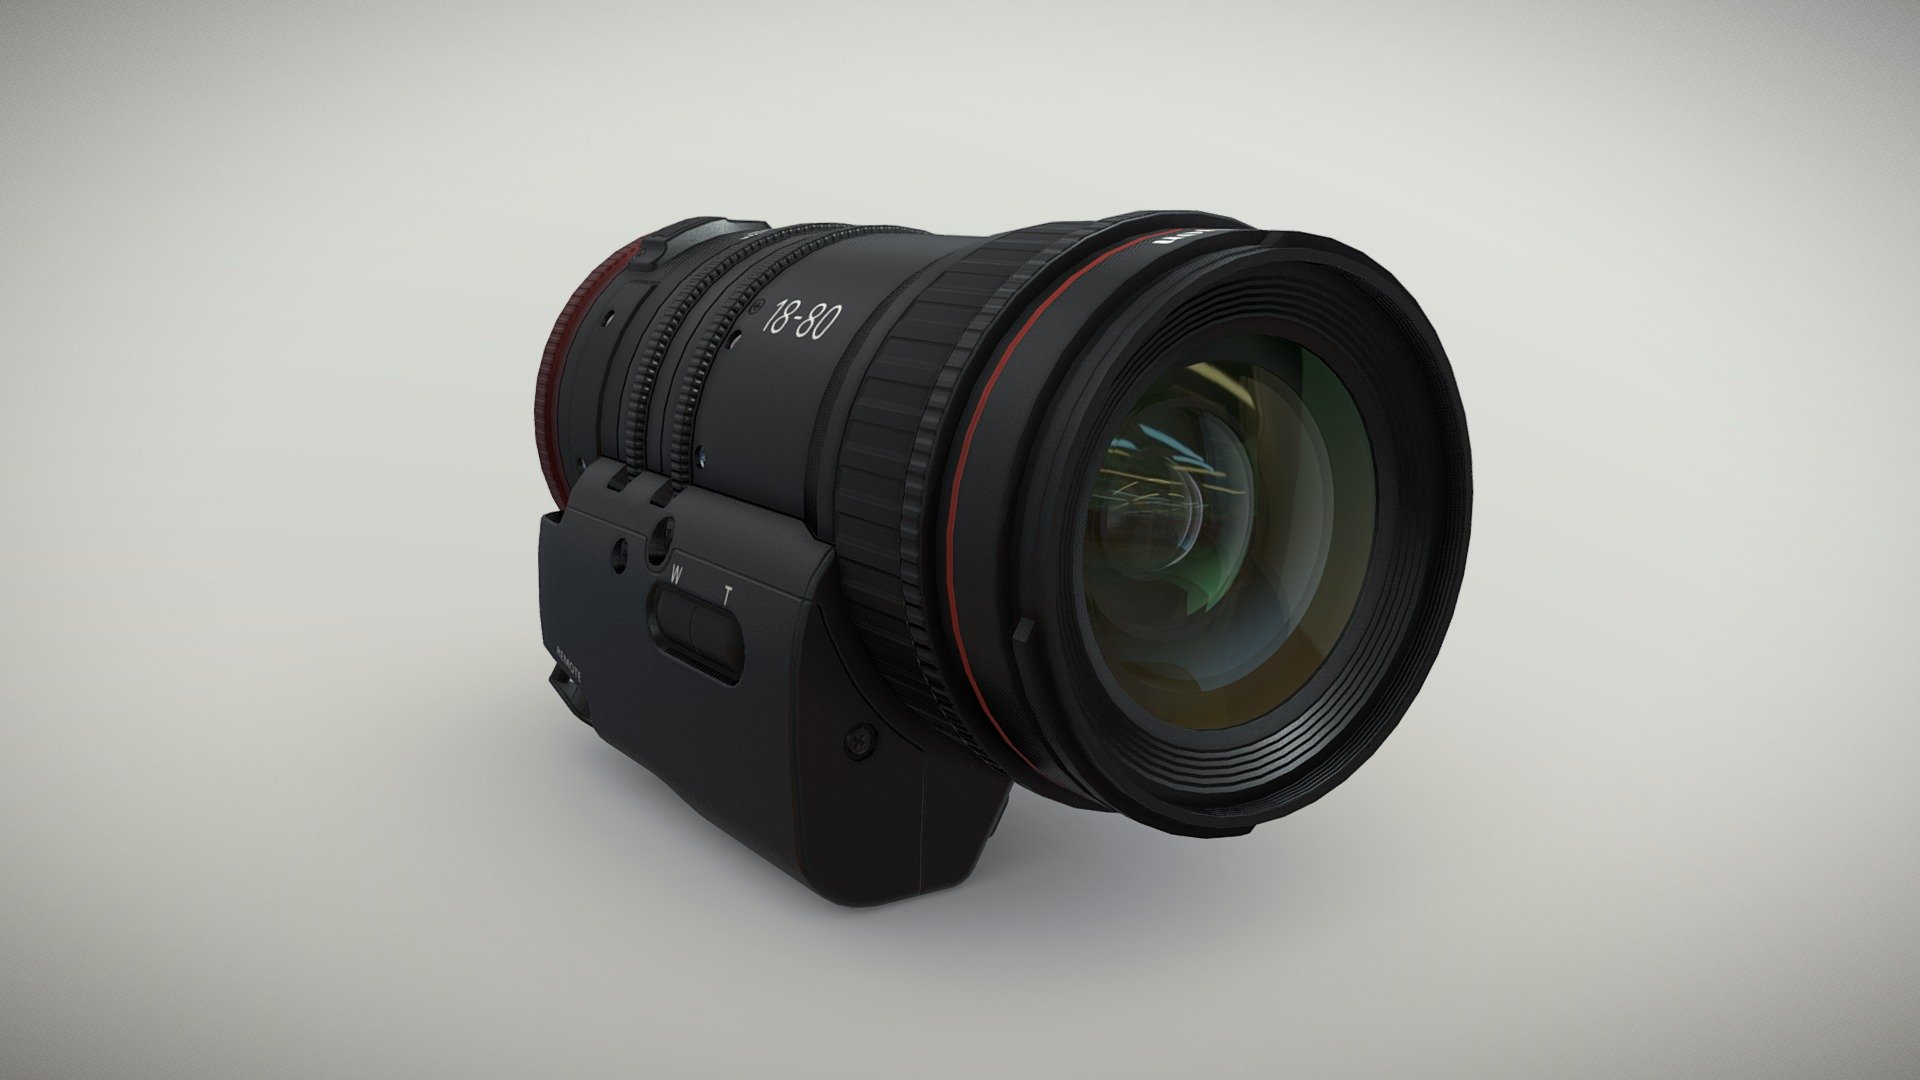 •   Let me present to you high-quality low-poly 3D model Canon Compact-Servo CN-E 18-80mm T4.4 EF Lens. Modeling was made with ortho-photos of real lens that is why all details of design are recreated most authentically.

•    This model consists of two meshes, it is low-polygonal and it has two materials (Lens body and Glass Lenses).

•   The total of the main textures is 4. Resolution of all textures is 4096 pixels square aspect ratio in .png format. Also there is original texture file .PSD format in separate archive.

•   Polygon count of the model is – 8578.

•   The model has correct dimensions in real-world scale. All parts grouped and named correctly.

•   To use the model in other 3D programs there are scenes saved in formats .fbx, .obj, .DAE, .max (2010 version).

Note: If you see some artifacts on the textures, it means compression works in the Viewer. We recommend setting HD quality for textures. But anyway, original textures have no artifacts 3d model